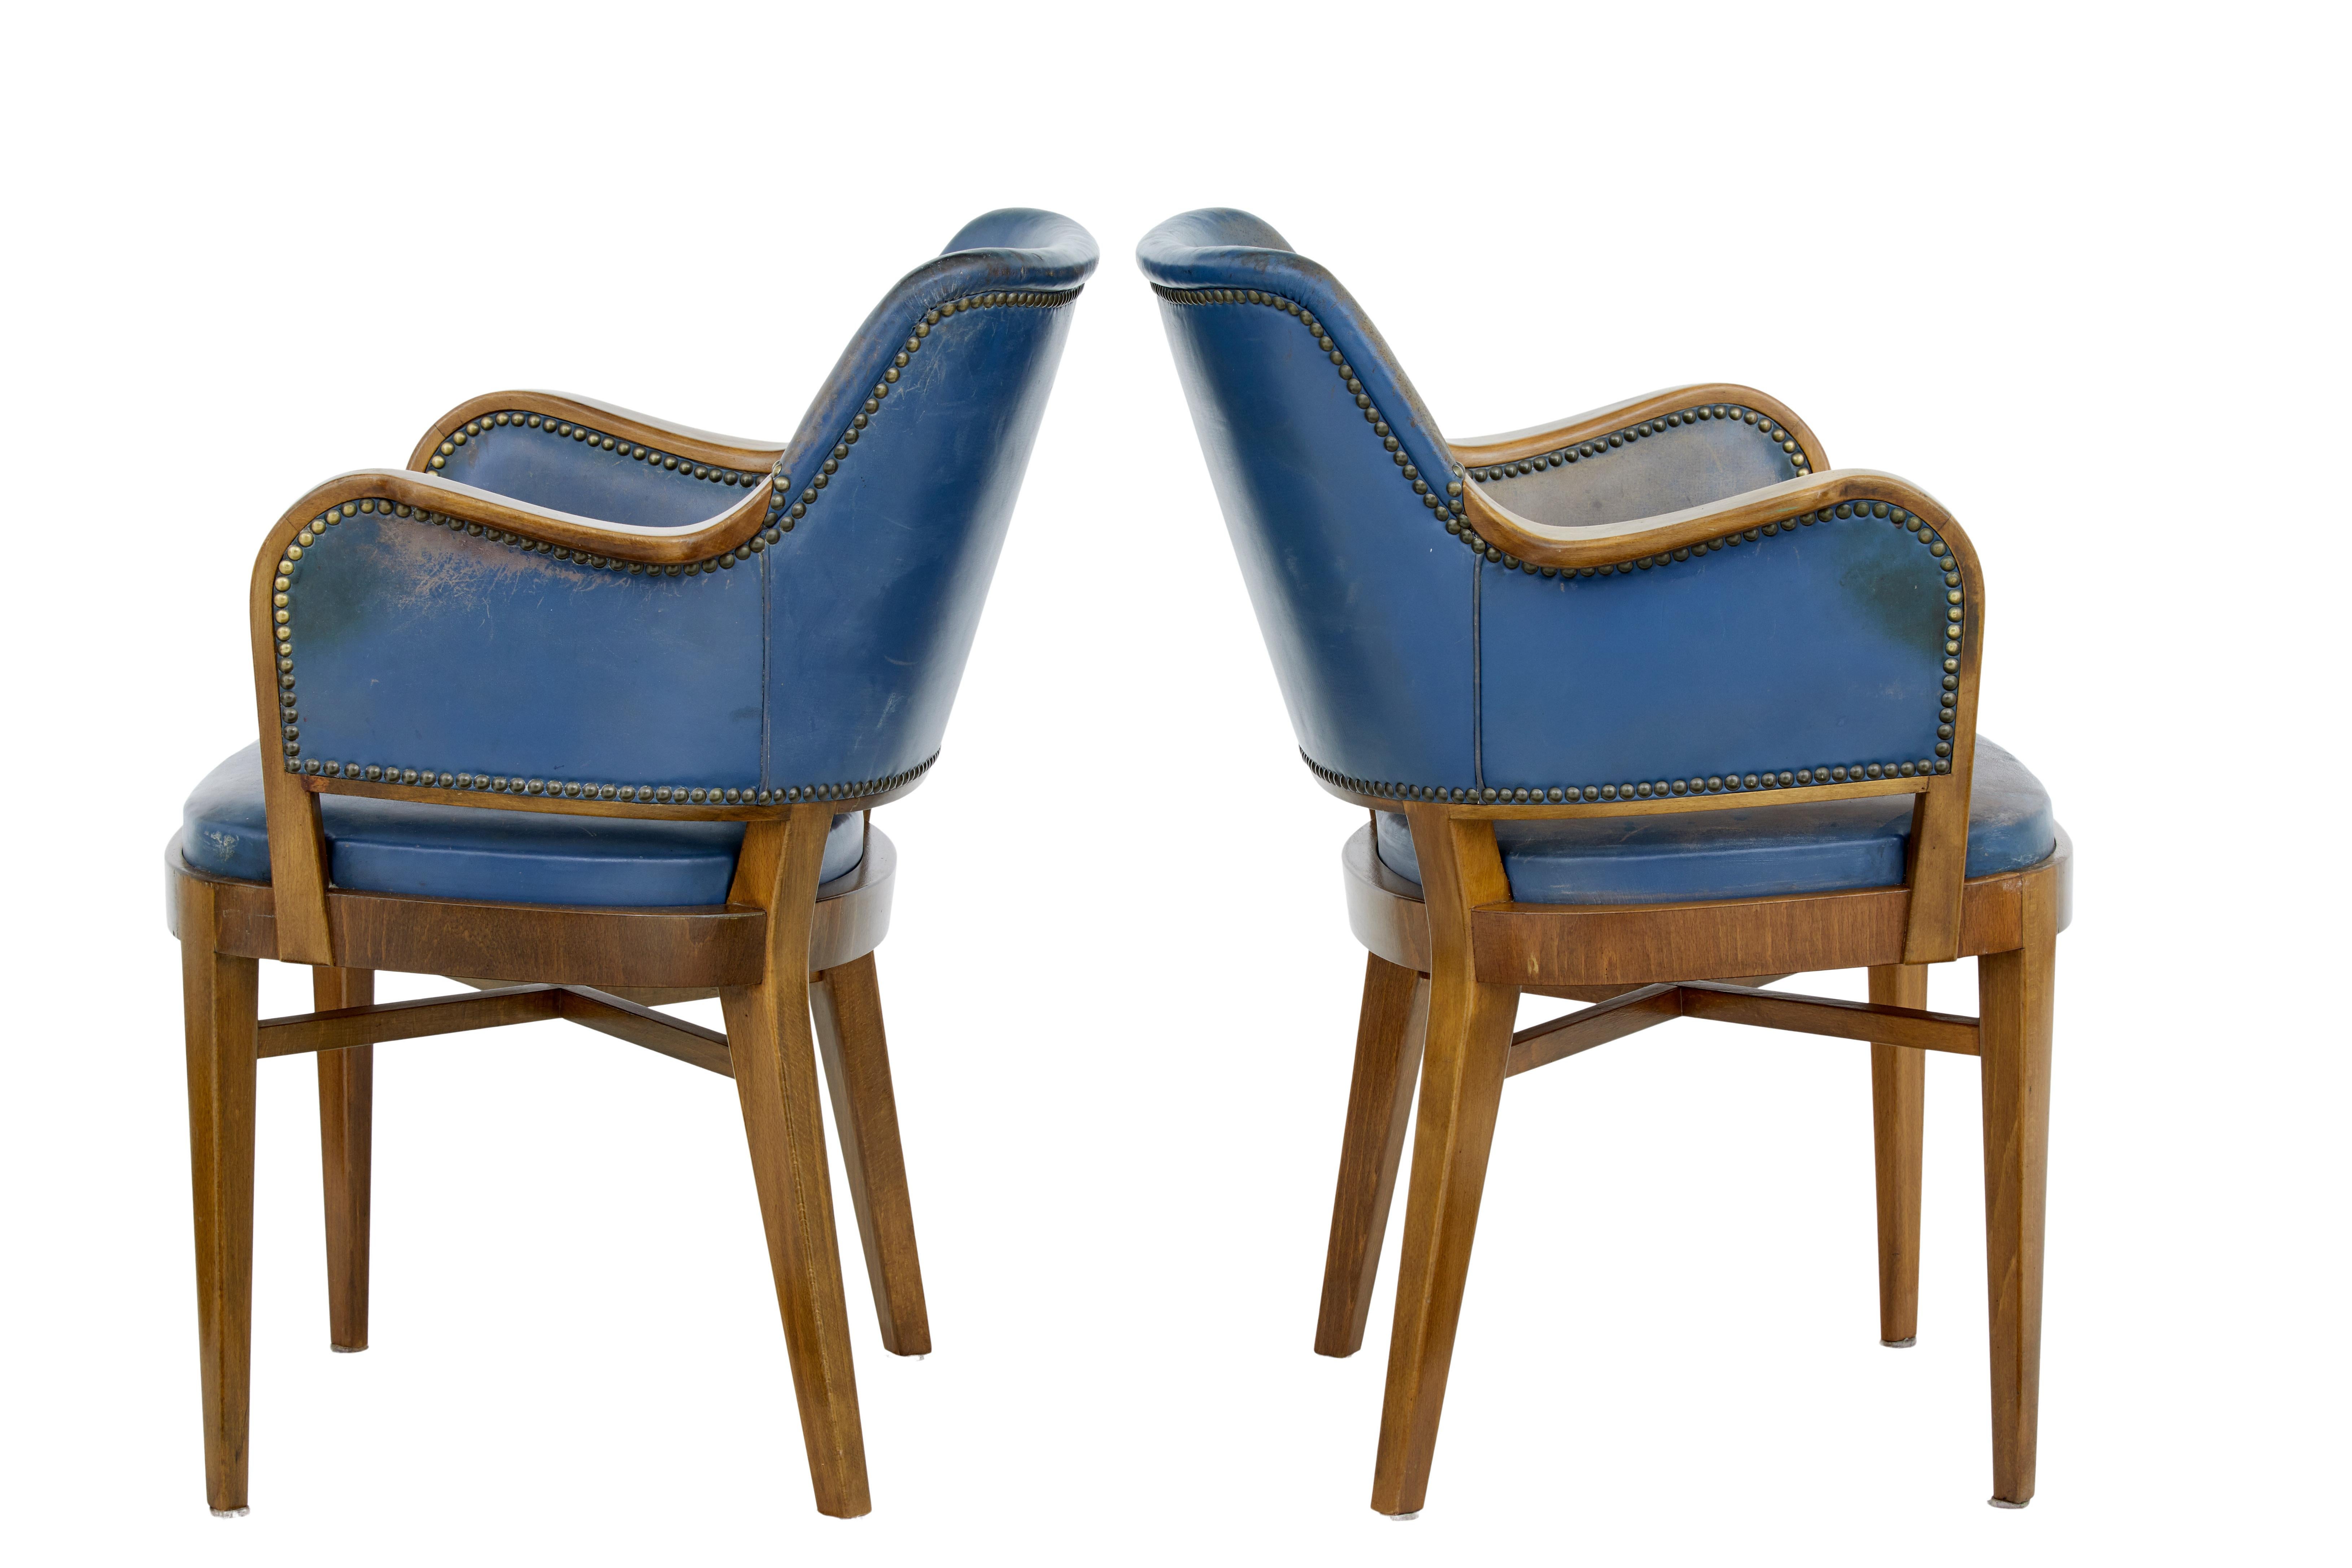 Pair of mid-20th century teak and leather armchairs, circa 1950.

Very comfortable pair of scandinavian armchairs. Shaped backs and made from teak that has been colored to match walnut. Showframe arms and original leather covering and studwork